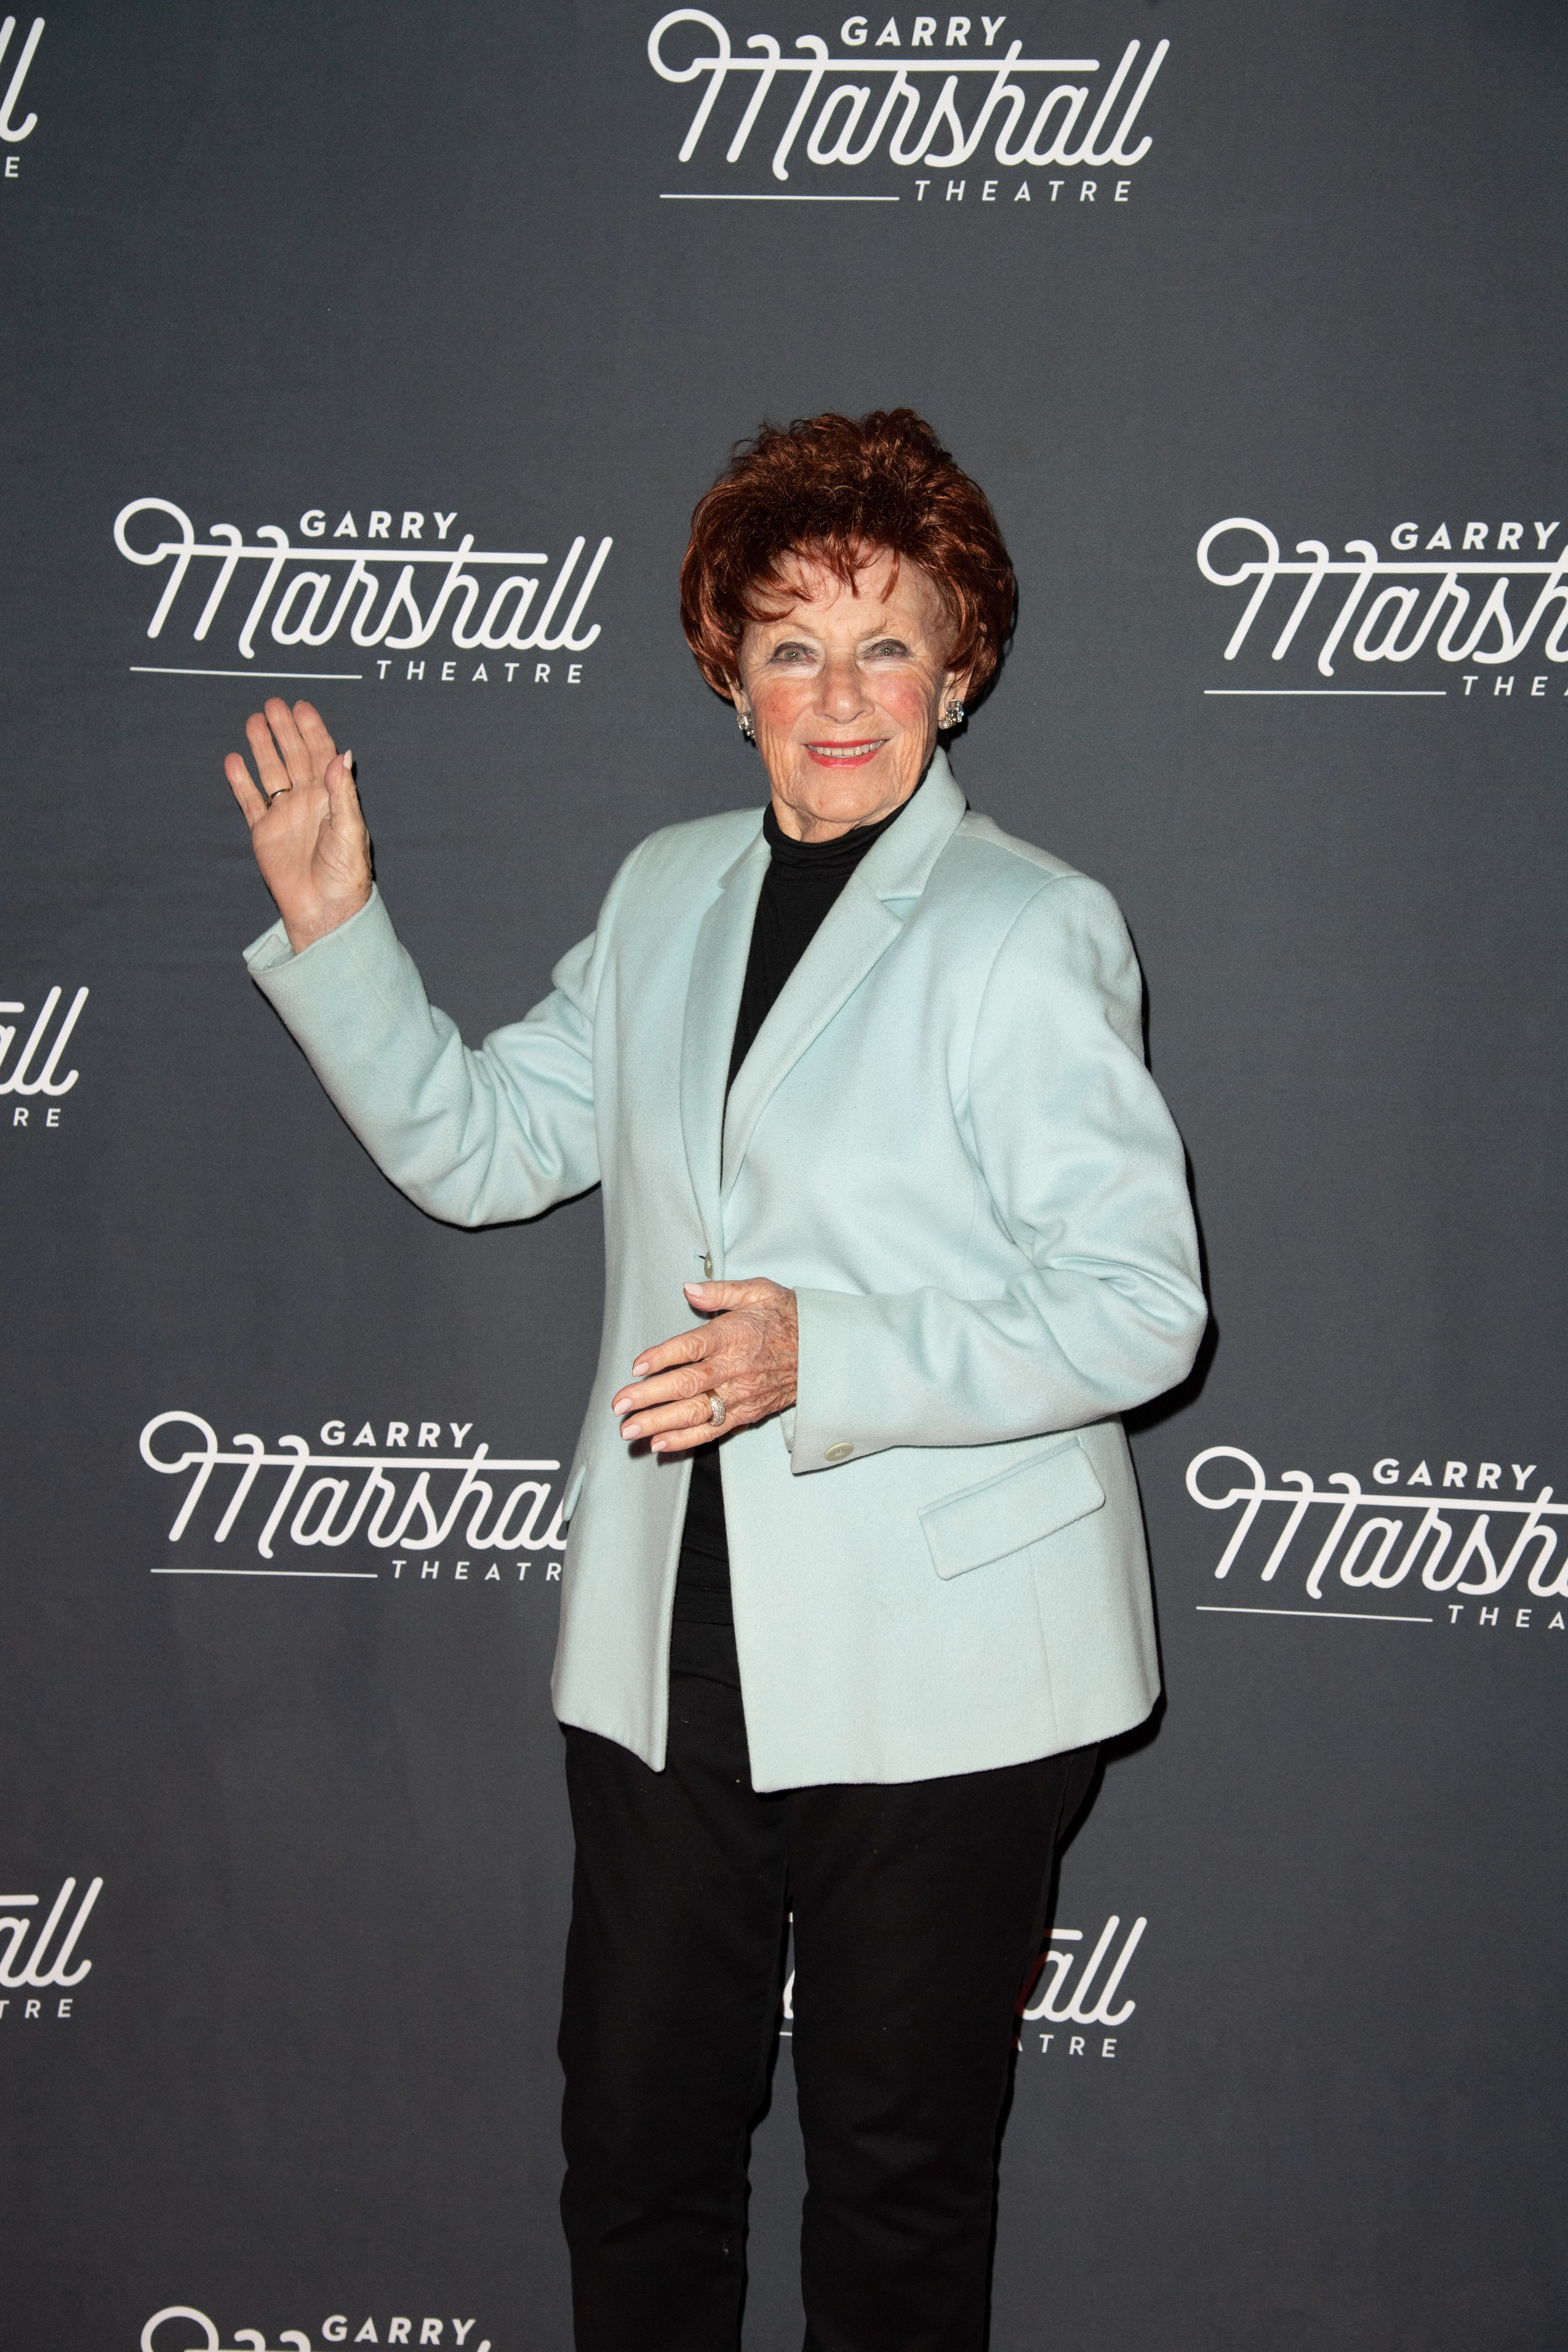 Marion Ross attends "The Mountaintop" Opening Night Performance at Garry Marshall Theatre on February 8, 2019 in Burbank, California. | Source: Getty Images 